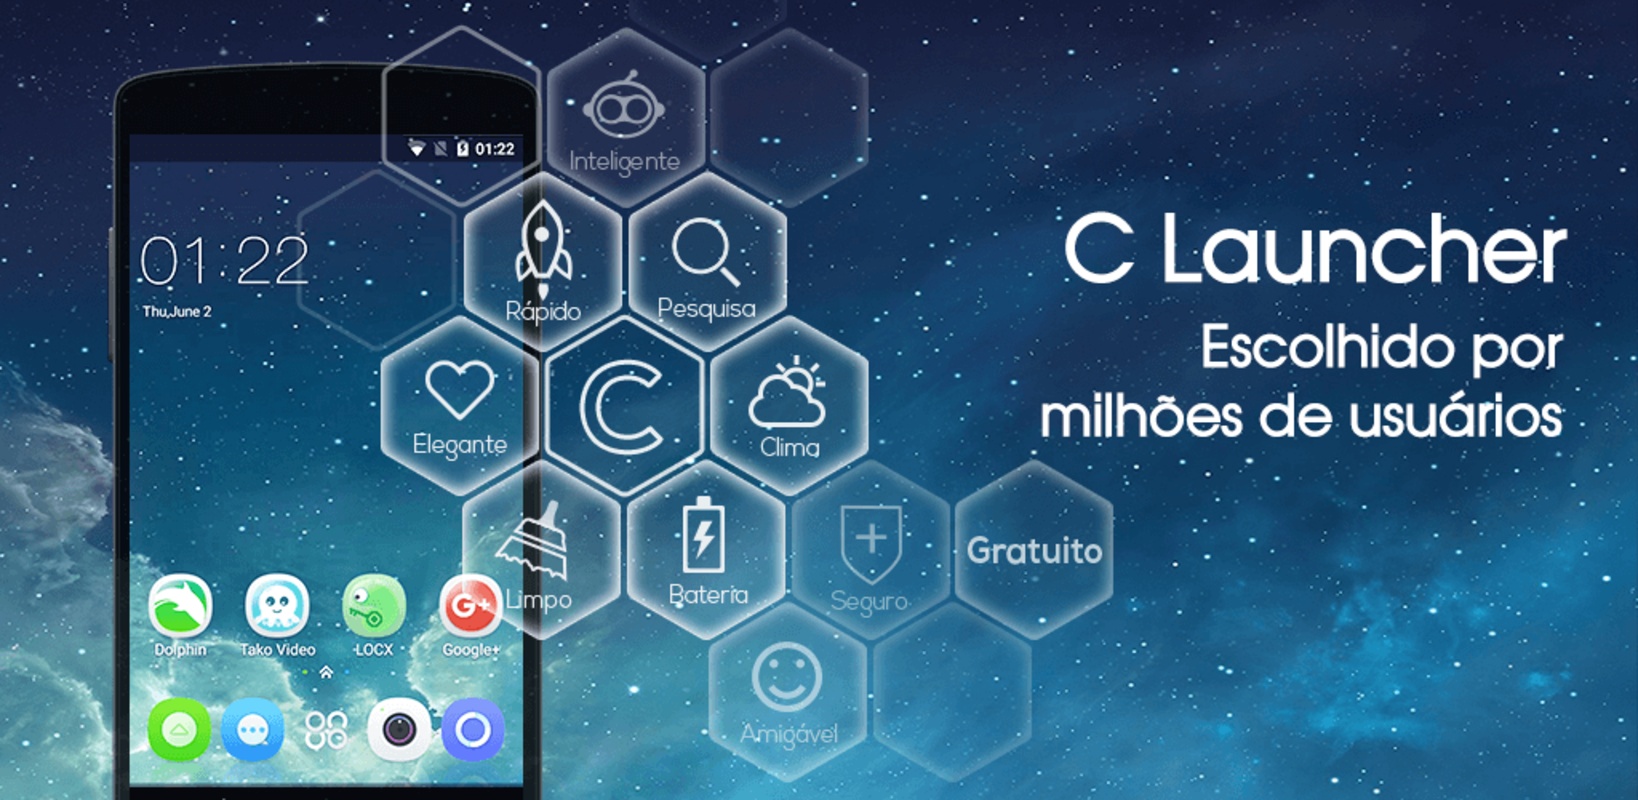 CLauncher 3.11.66 APK for Android Screenshot 59